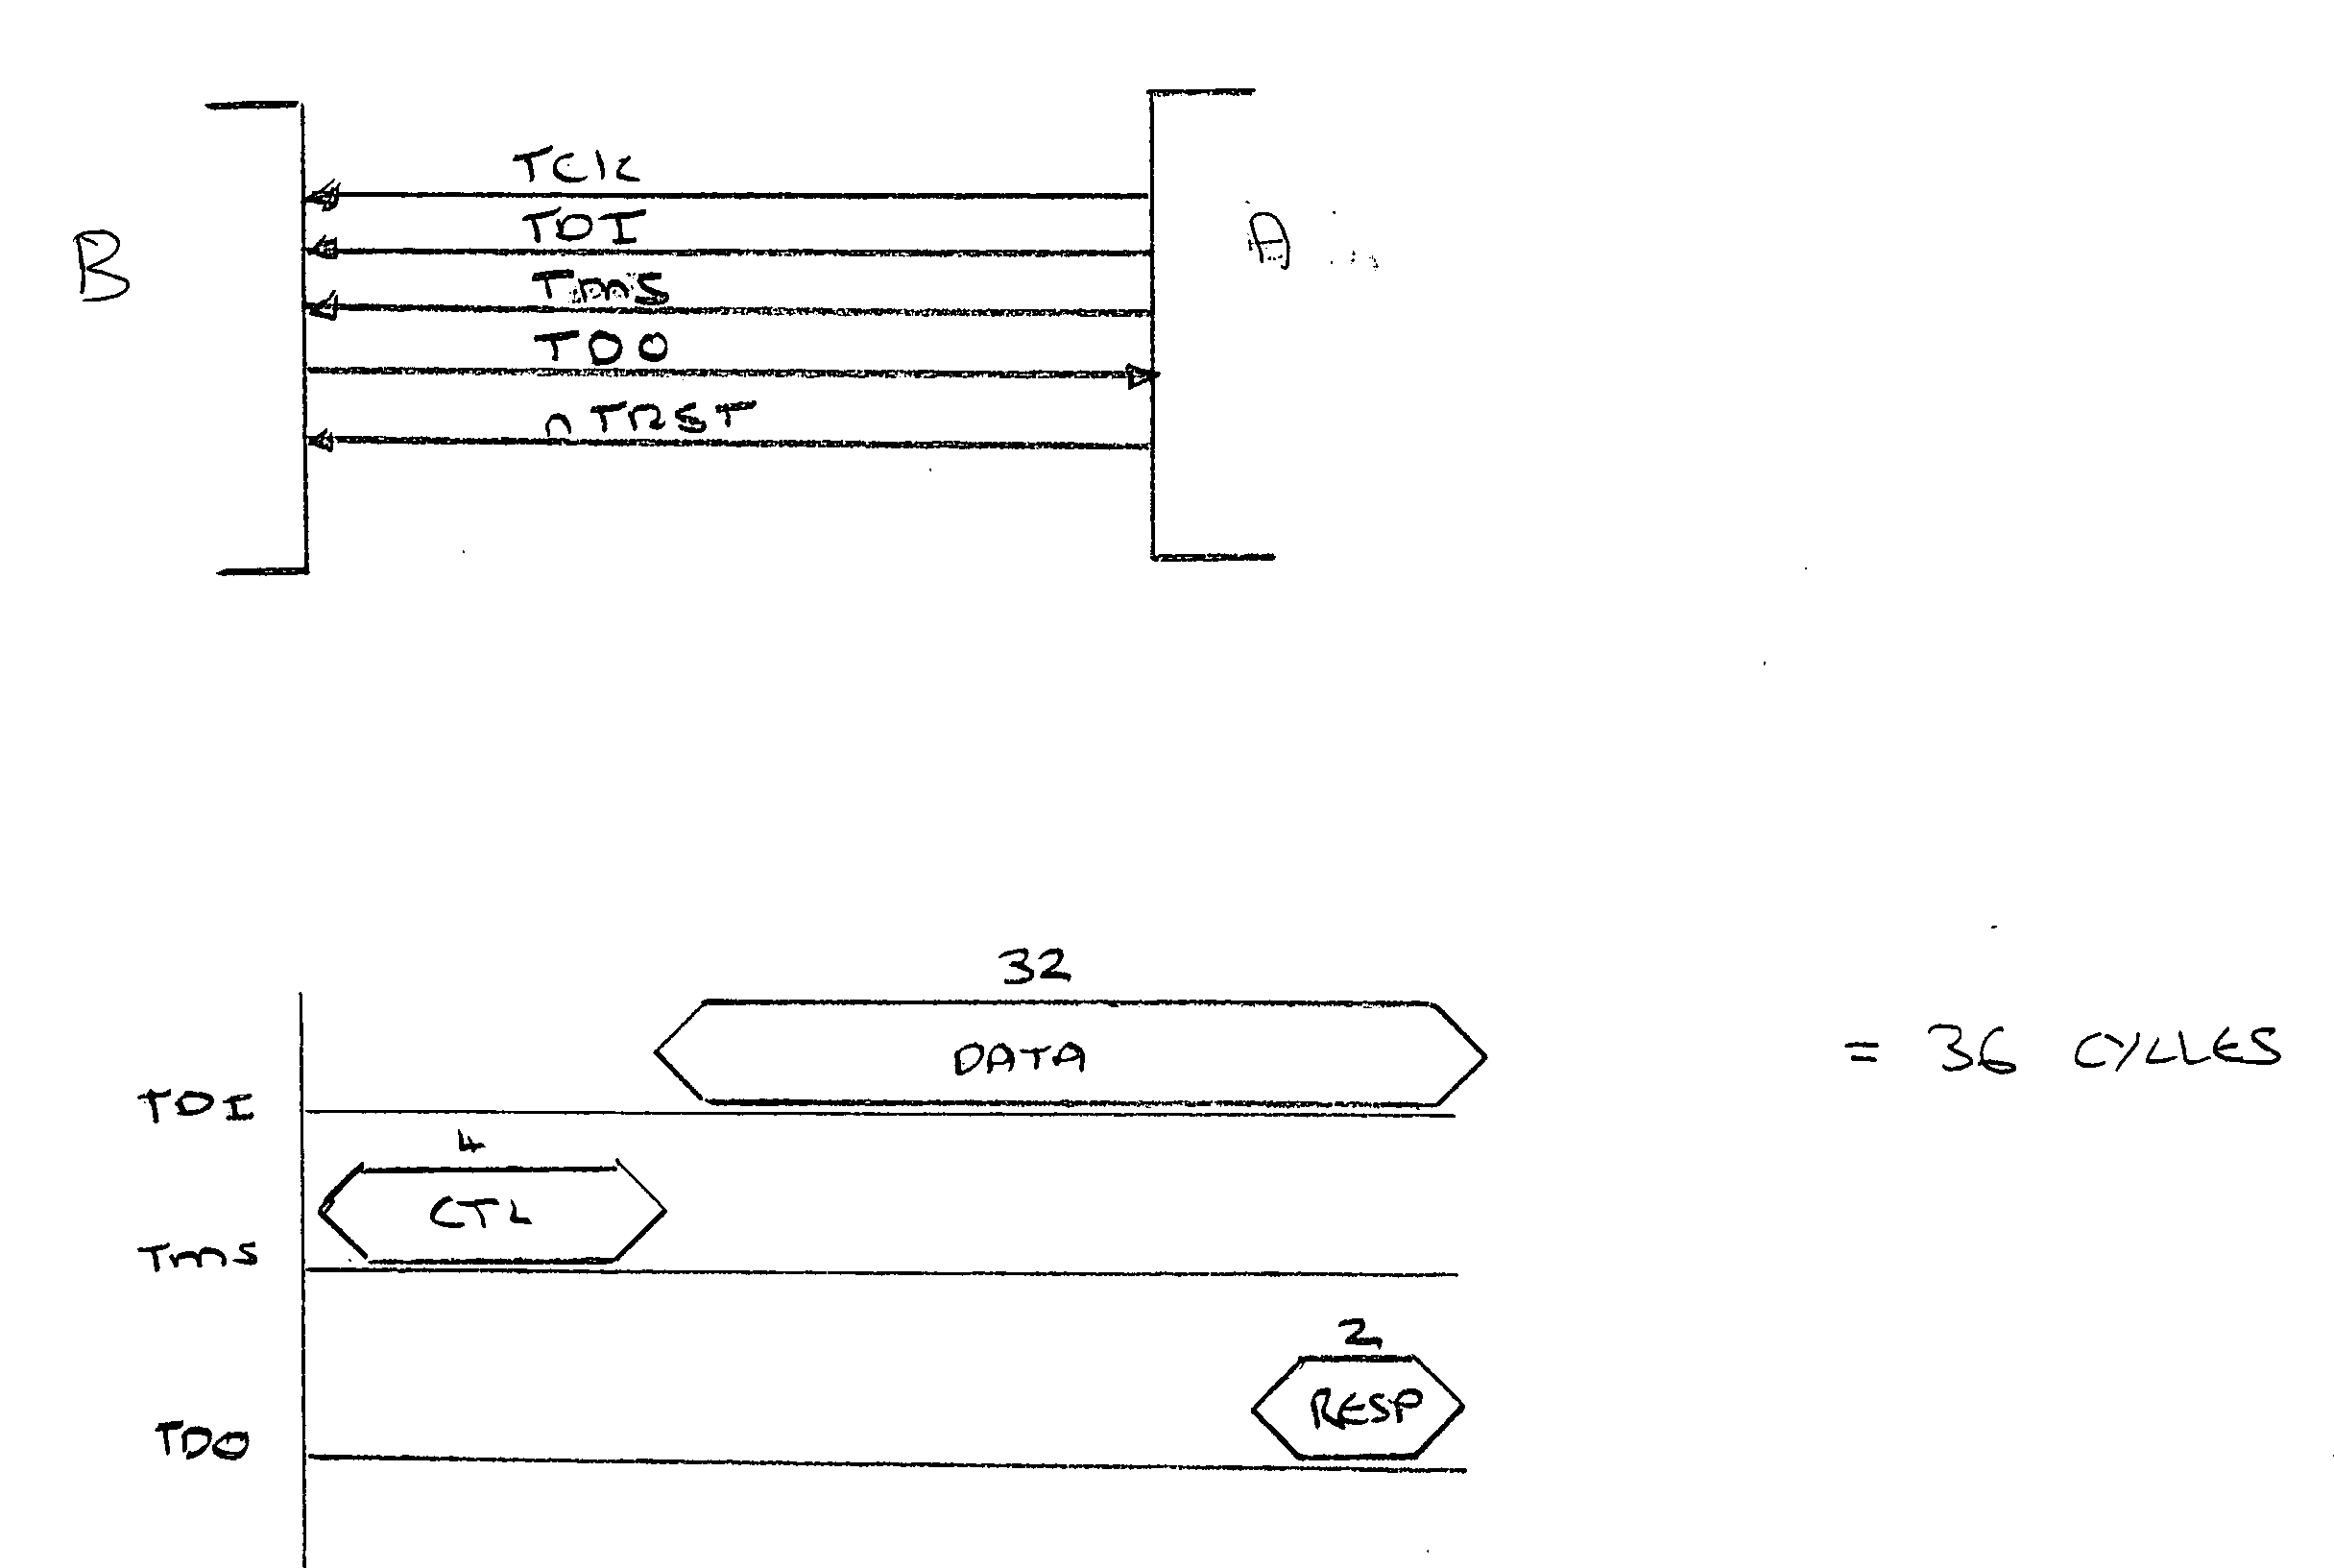 Controlling the configuration of a transmission path